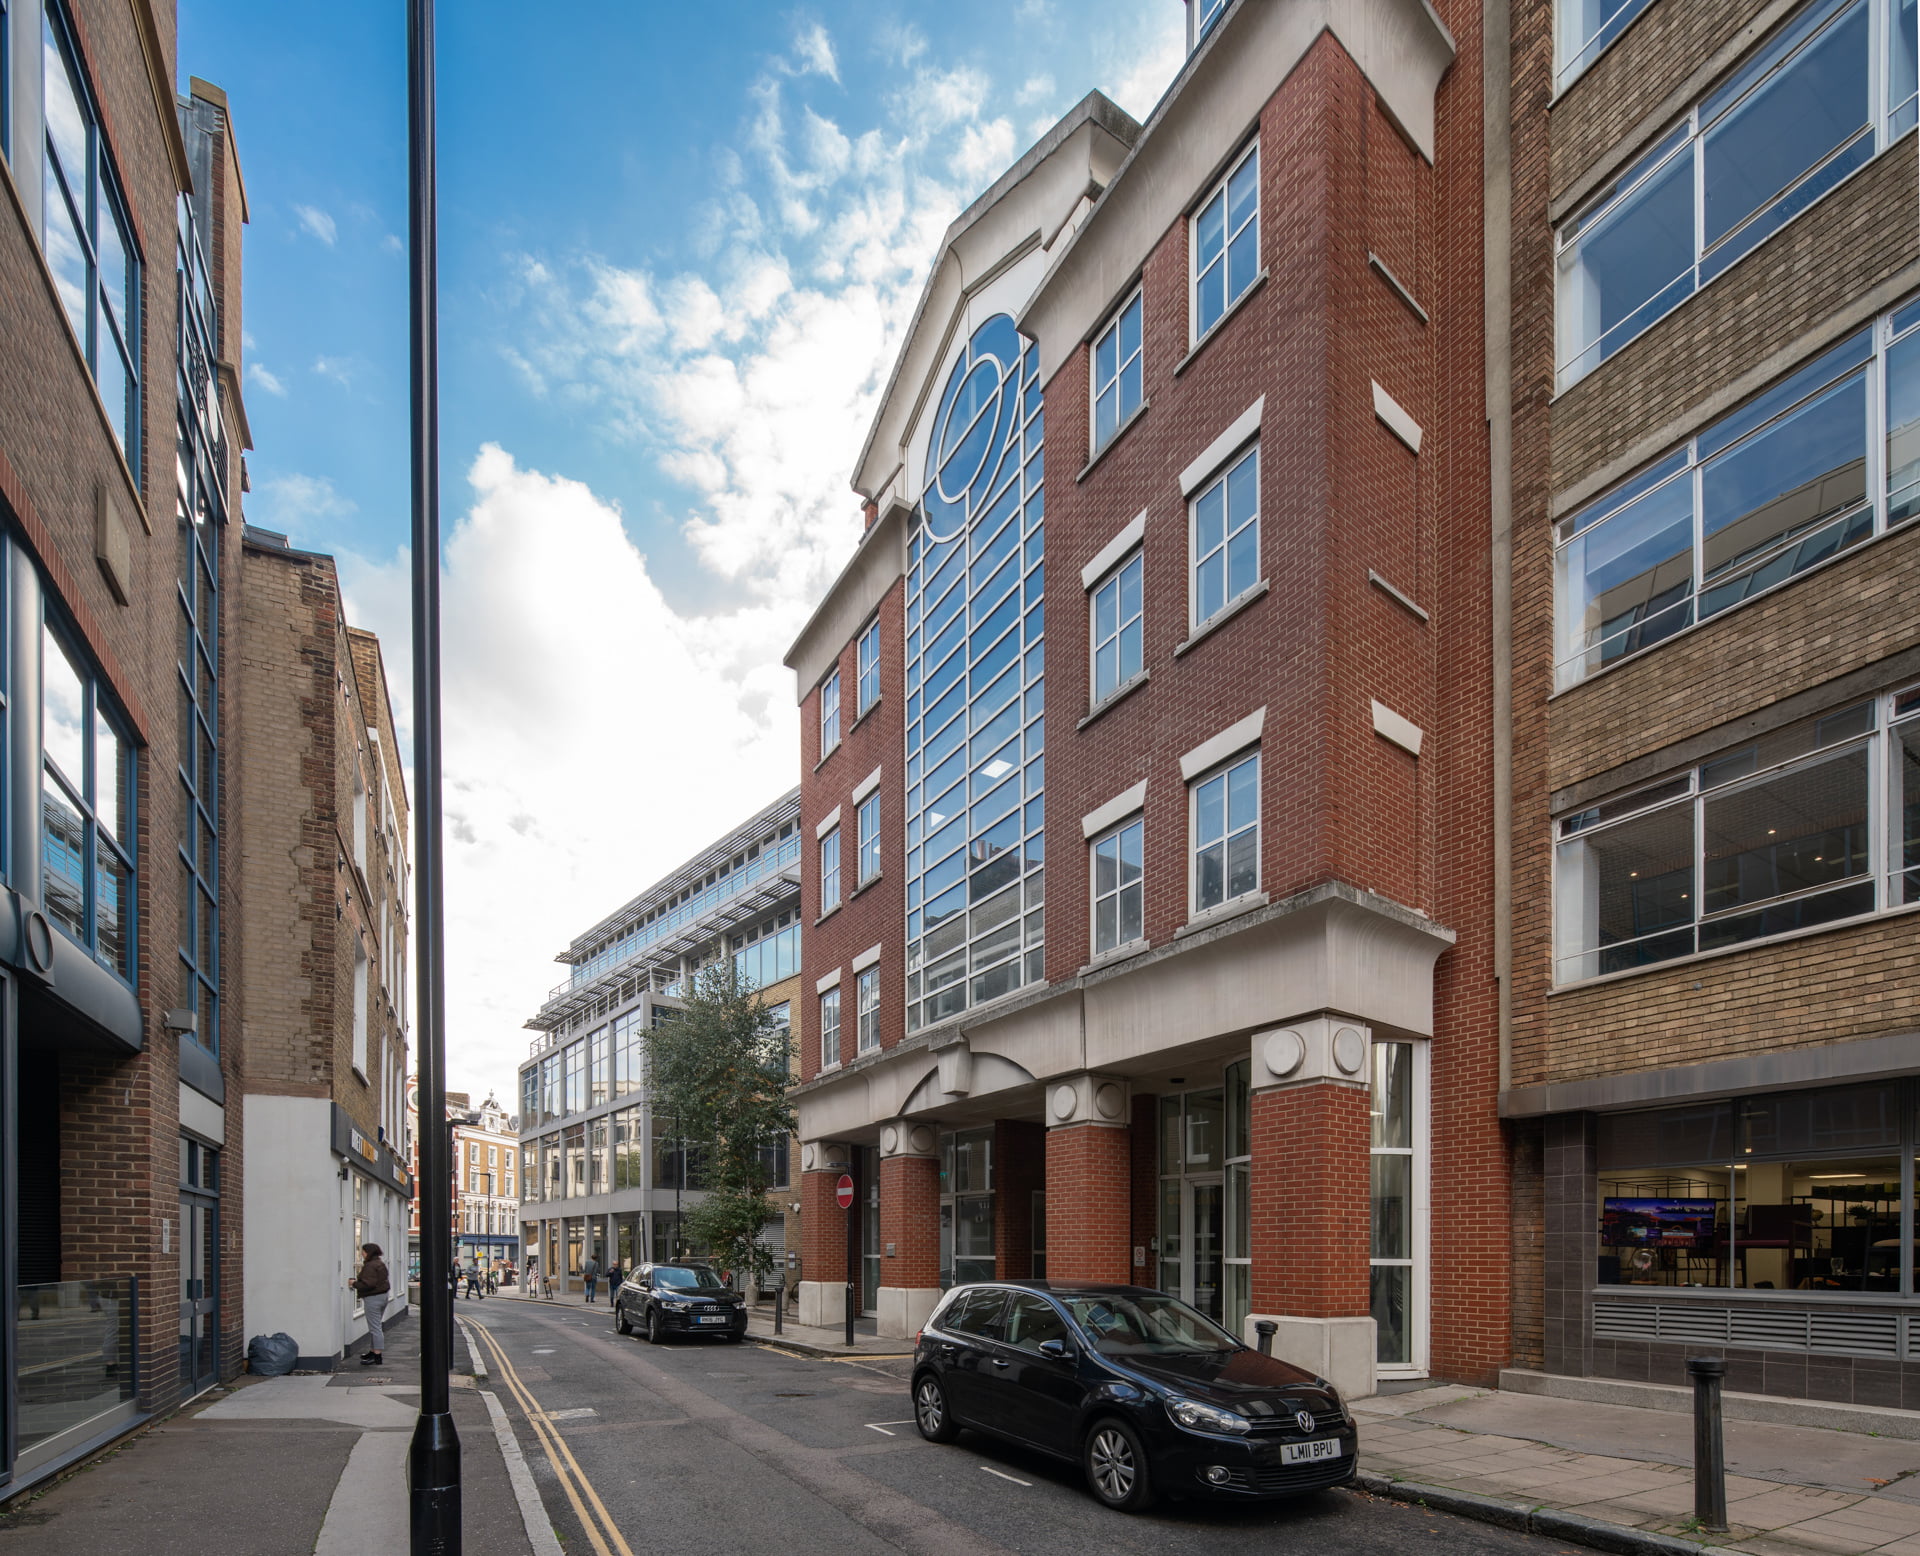 Finding office space in Farringdon